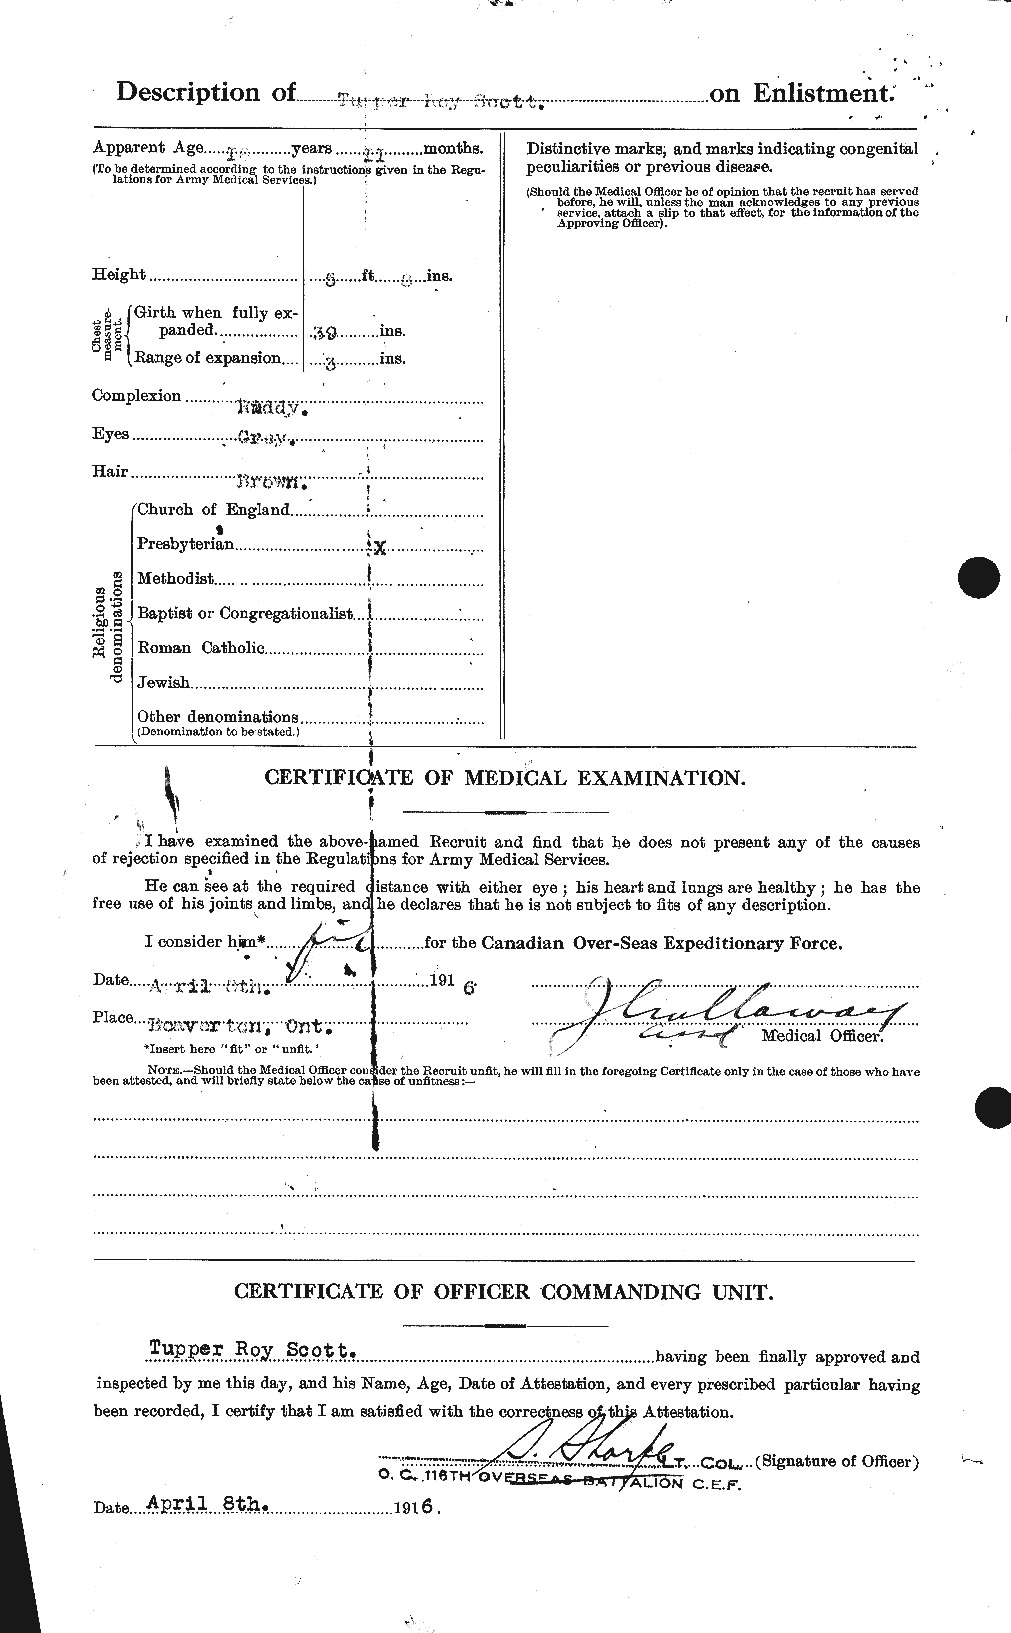 Personnel Records of the First World War - CEF 088206b